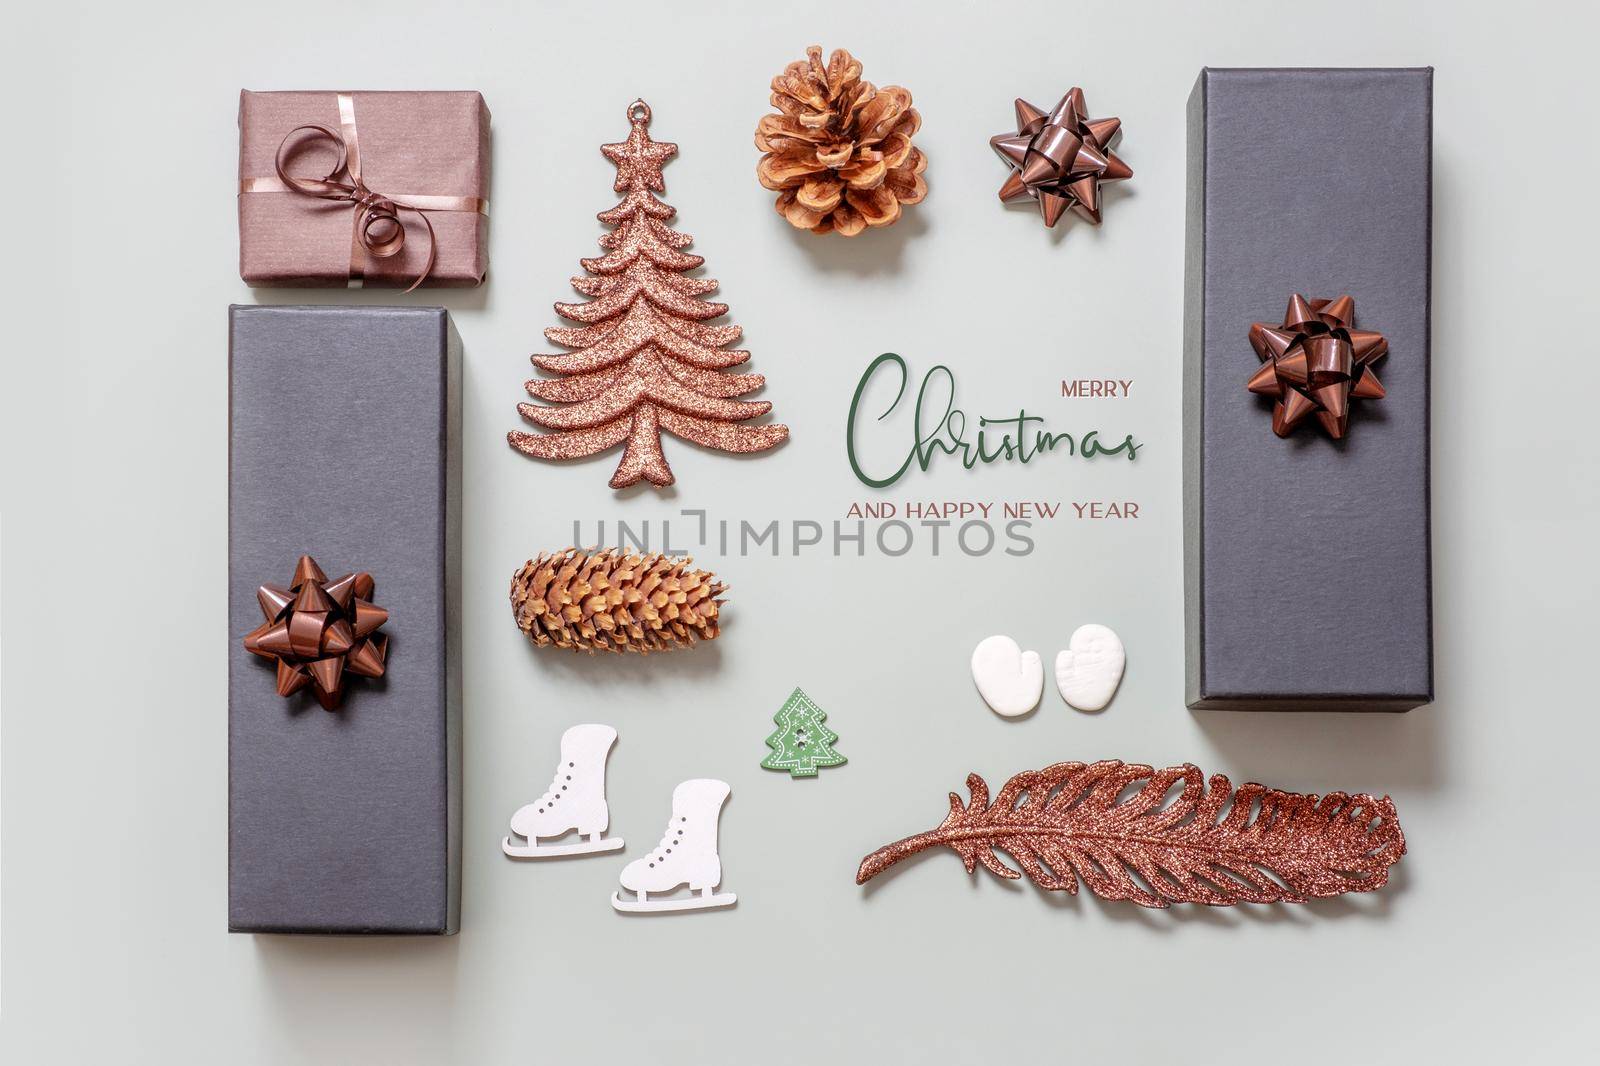 Merry Christmas and happy New Year greeting card with flatlay gifts and holiday decor top view.